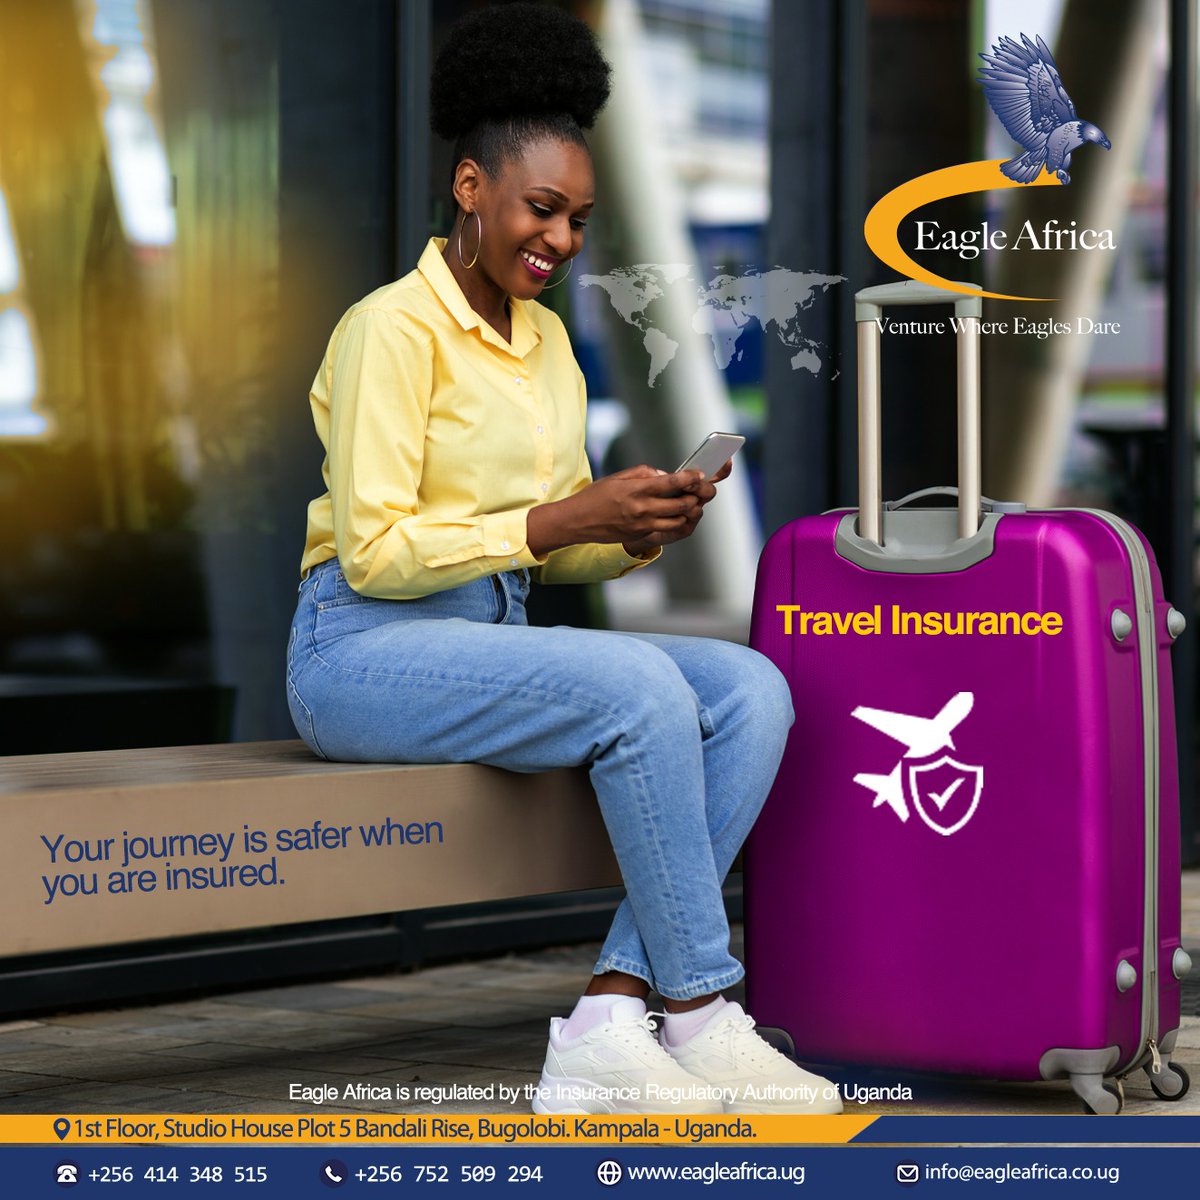 Are you traveling somewhere?
Better get covered for a safer journey!

#EagleAfrica #TravelInsurance #insurancecover #insurancebroker